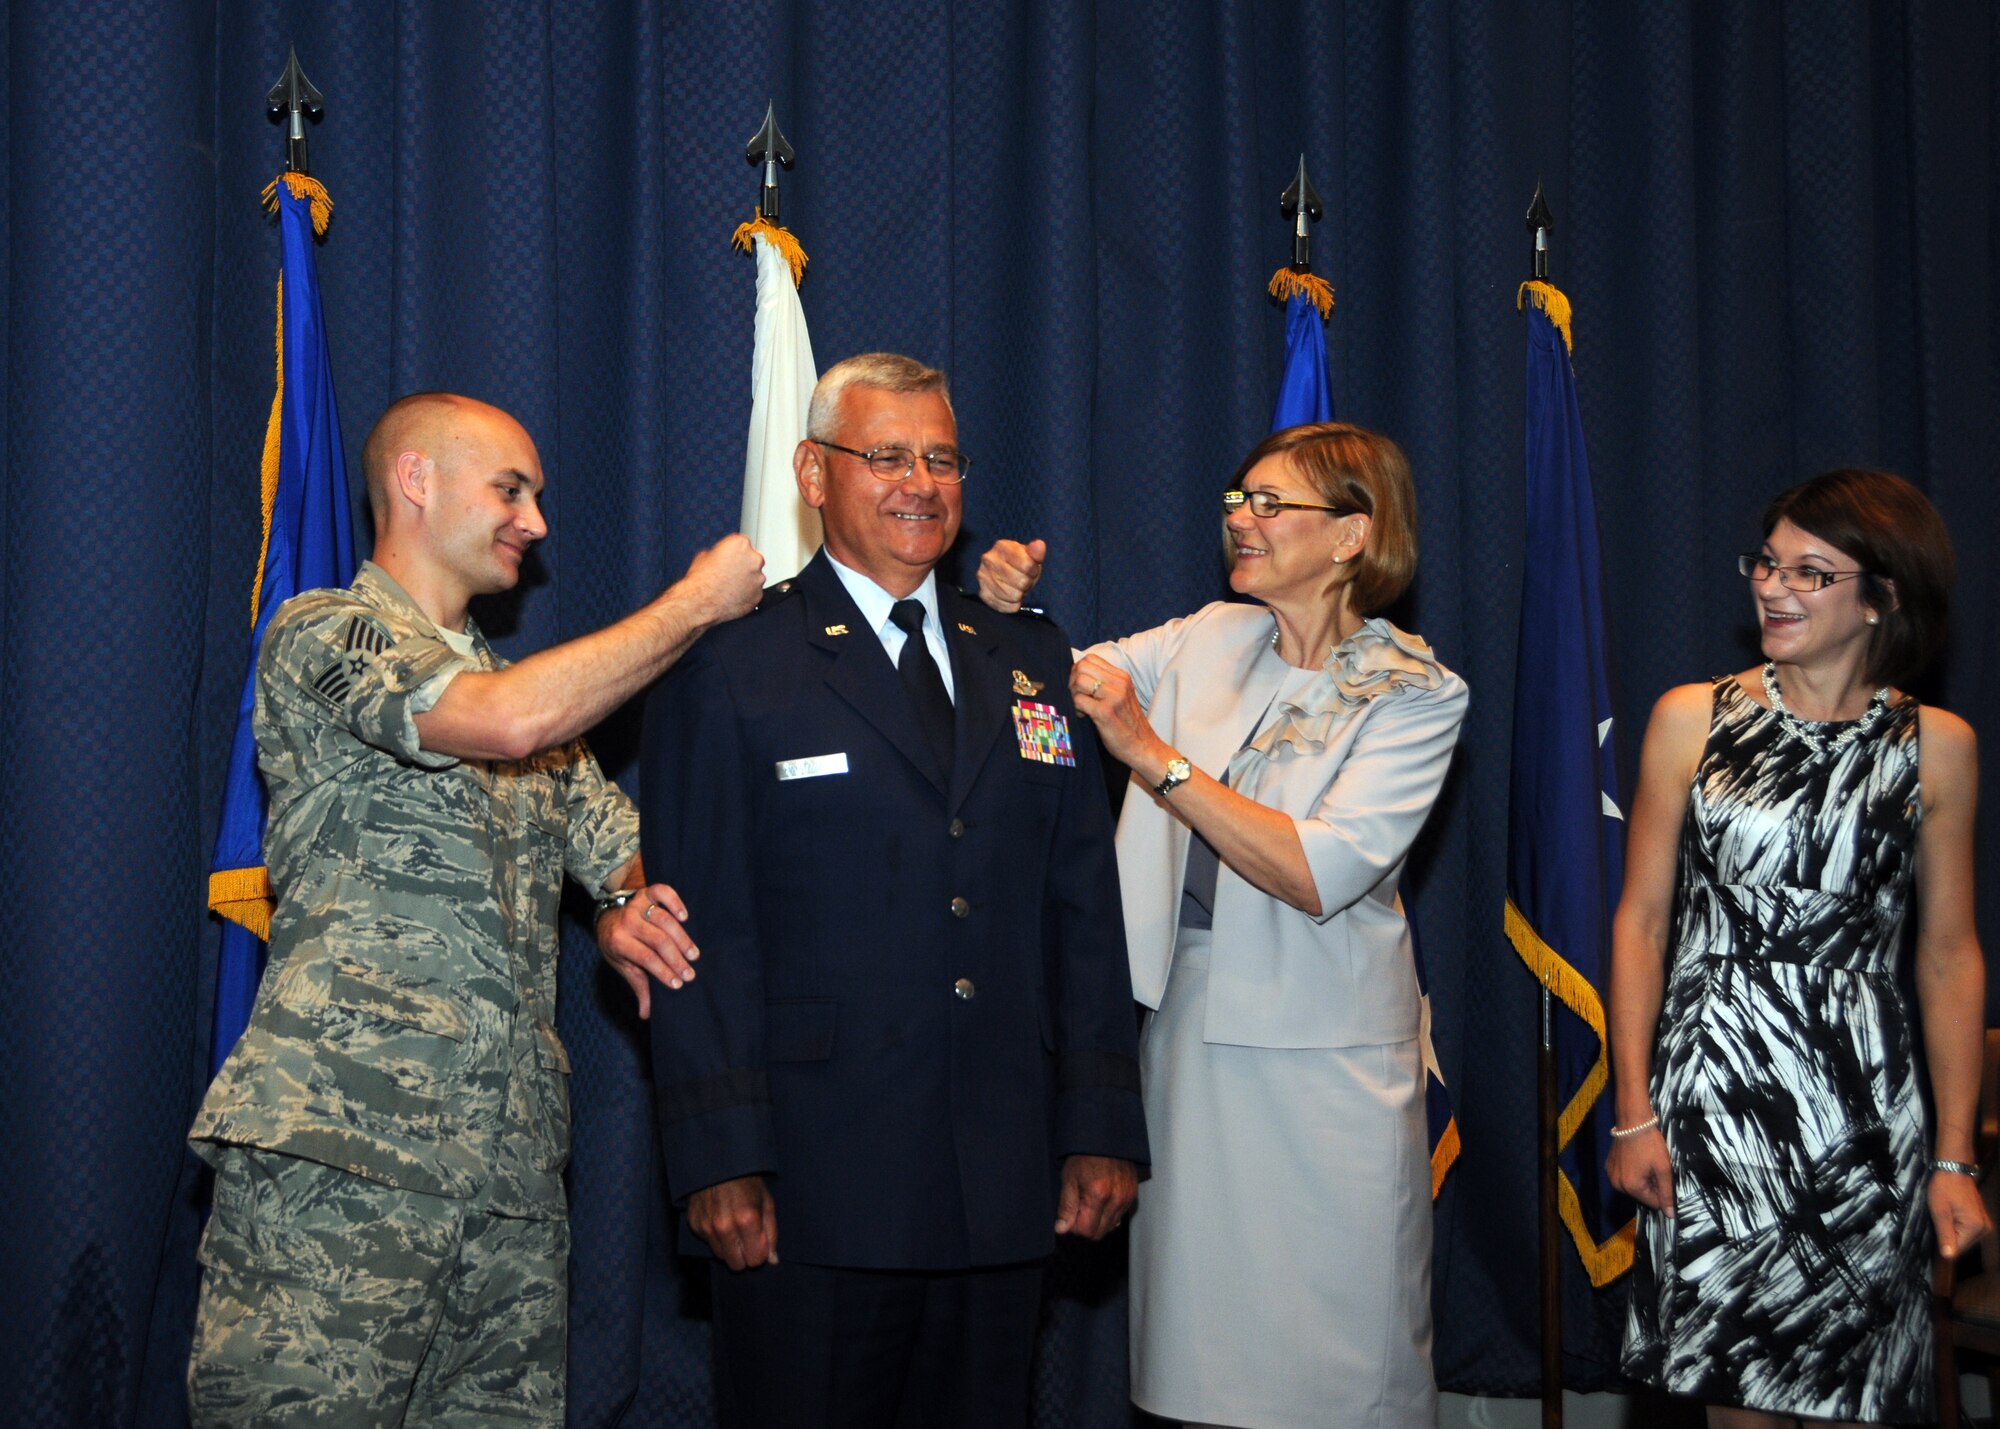 Maj. Gen. James Kwiatkowski is pinned by his son 107th AW Tech. Sgt. Andrew Kwiatkowski and the general's wife Ranea on right as his other daughter Nicole Dabby looks on during a ceremony held Aug. 4 at Scott AFB. "This is a sacred trust and I will do my best to be effective in the trust placed in me today," said the general. (U.S. Air Force photo/Staff Sgt. Peter Dean)